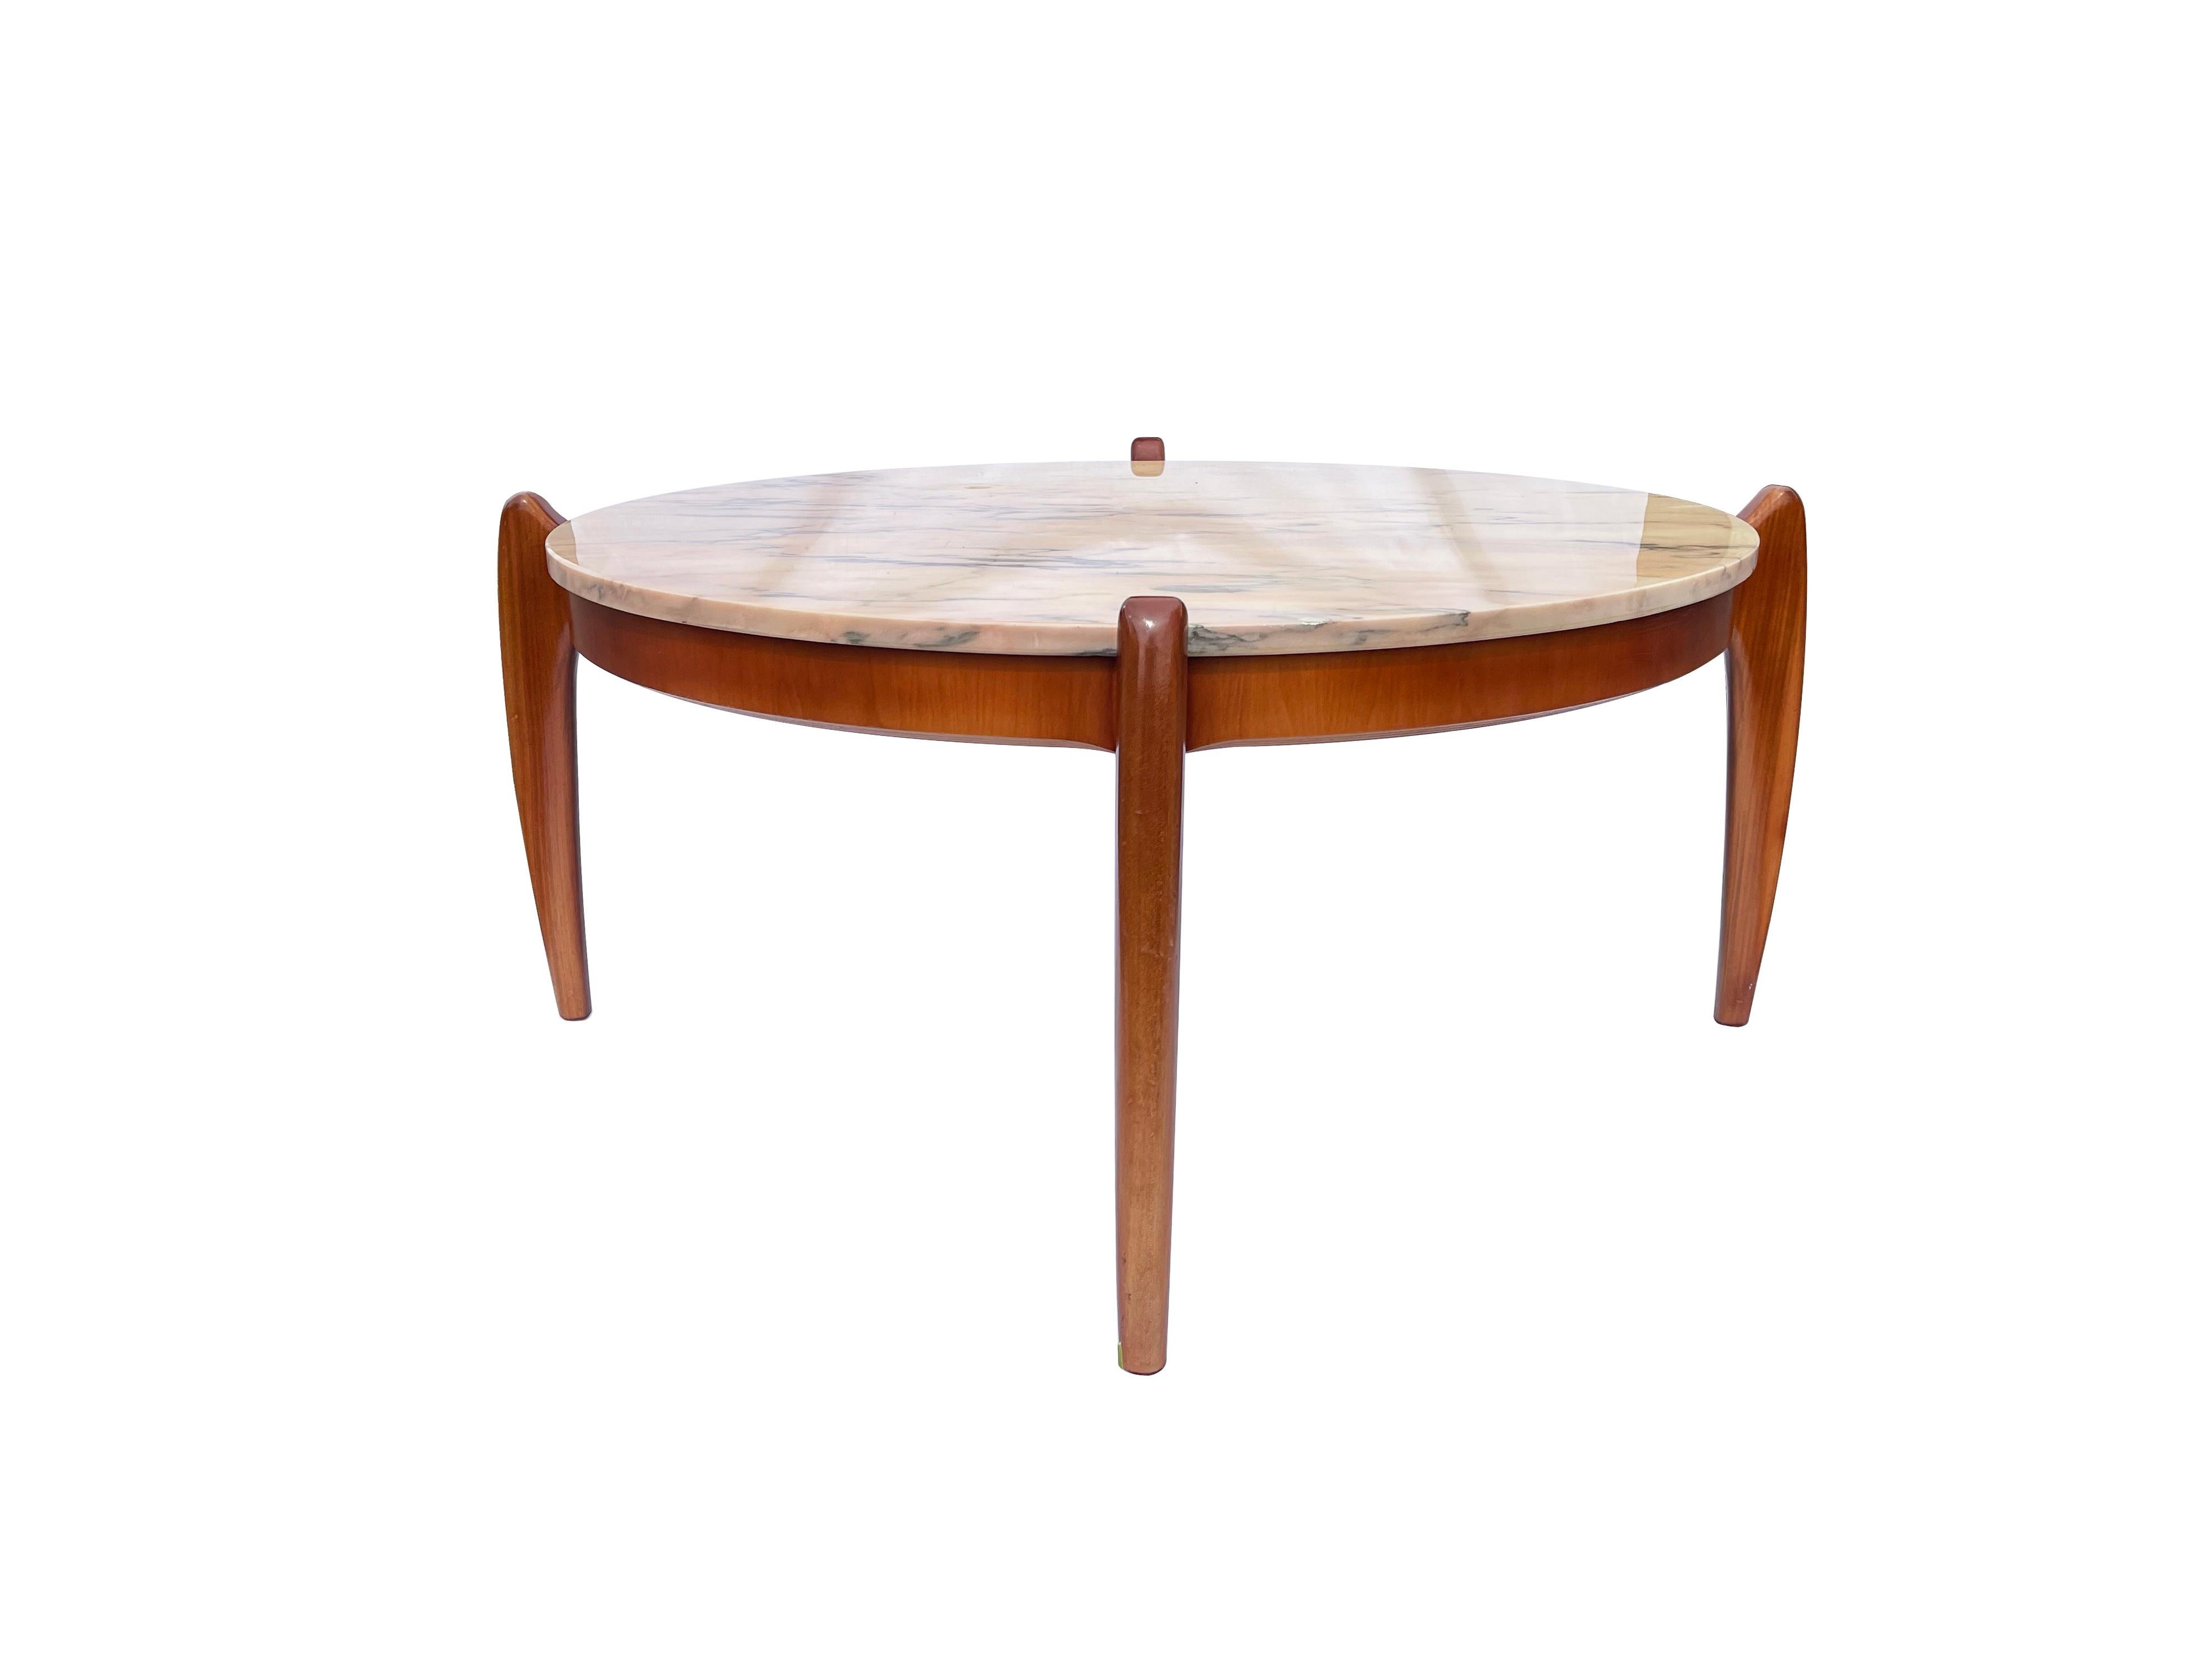 Fantastic mid-century spider legged coffee table following the design styles of Gio Ponti, as much as Giuseppe Scapinelli.
Most likely made in Germany, here with a heavy Porto Rosé marble top.
This marble stems from Portugal.
The wooden base of the